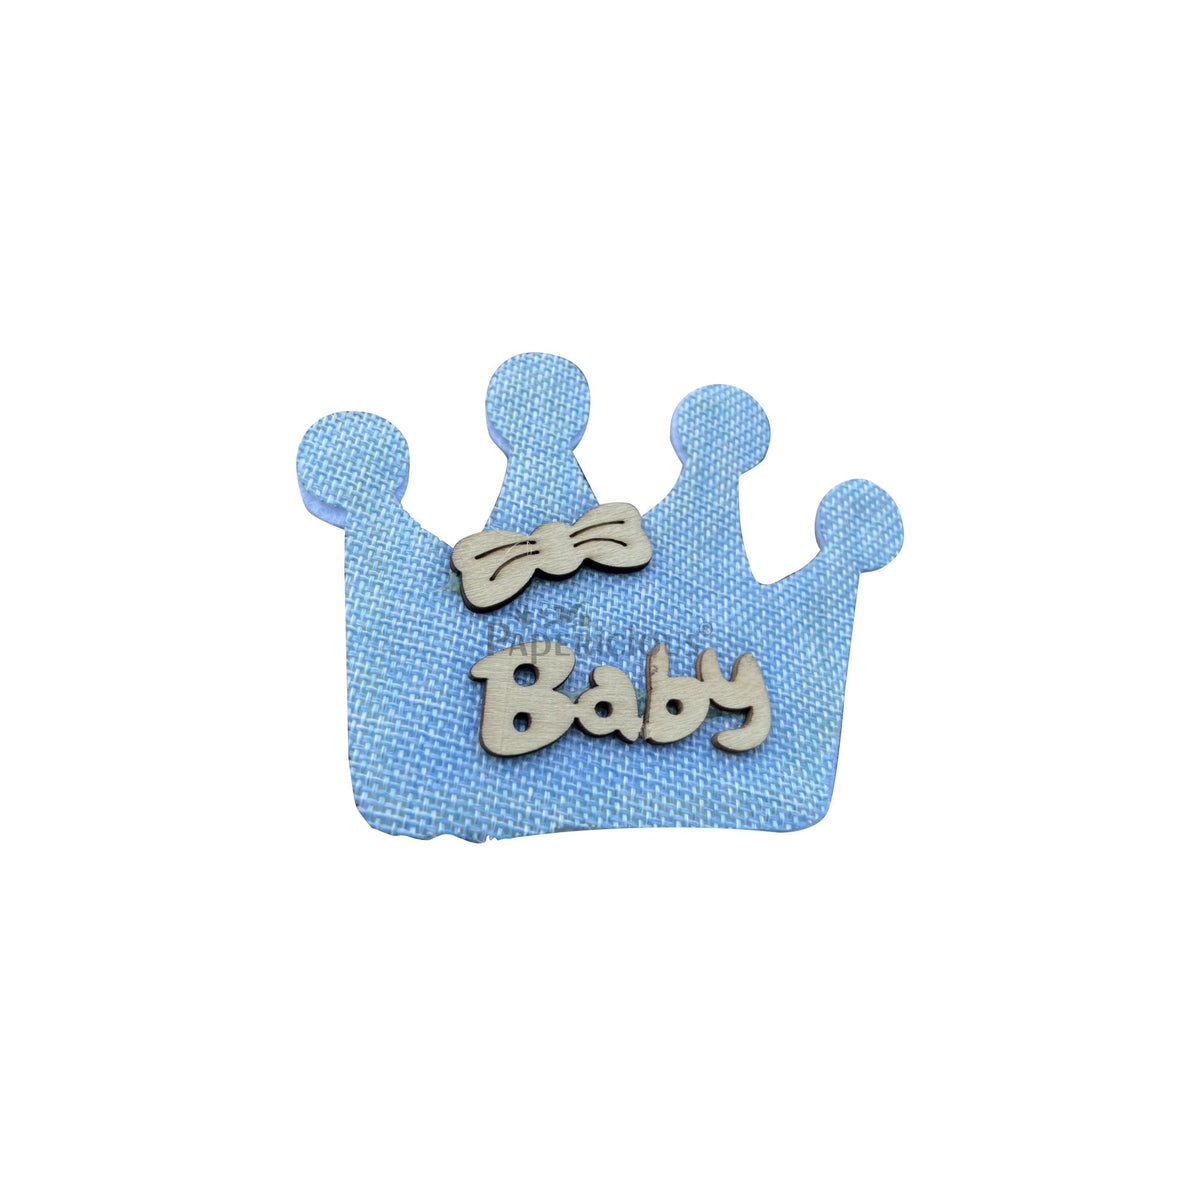 PAPERICIOUS - Felt Baby Crown Embellishment - Ready to Use - 1 pcs